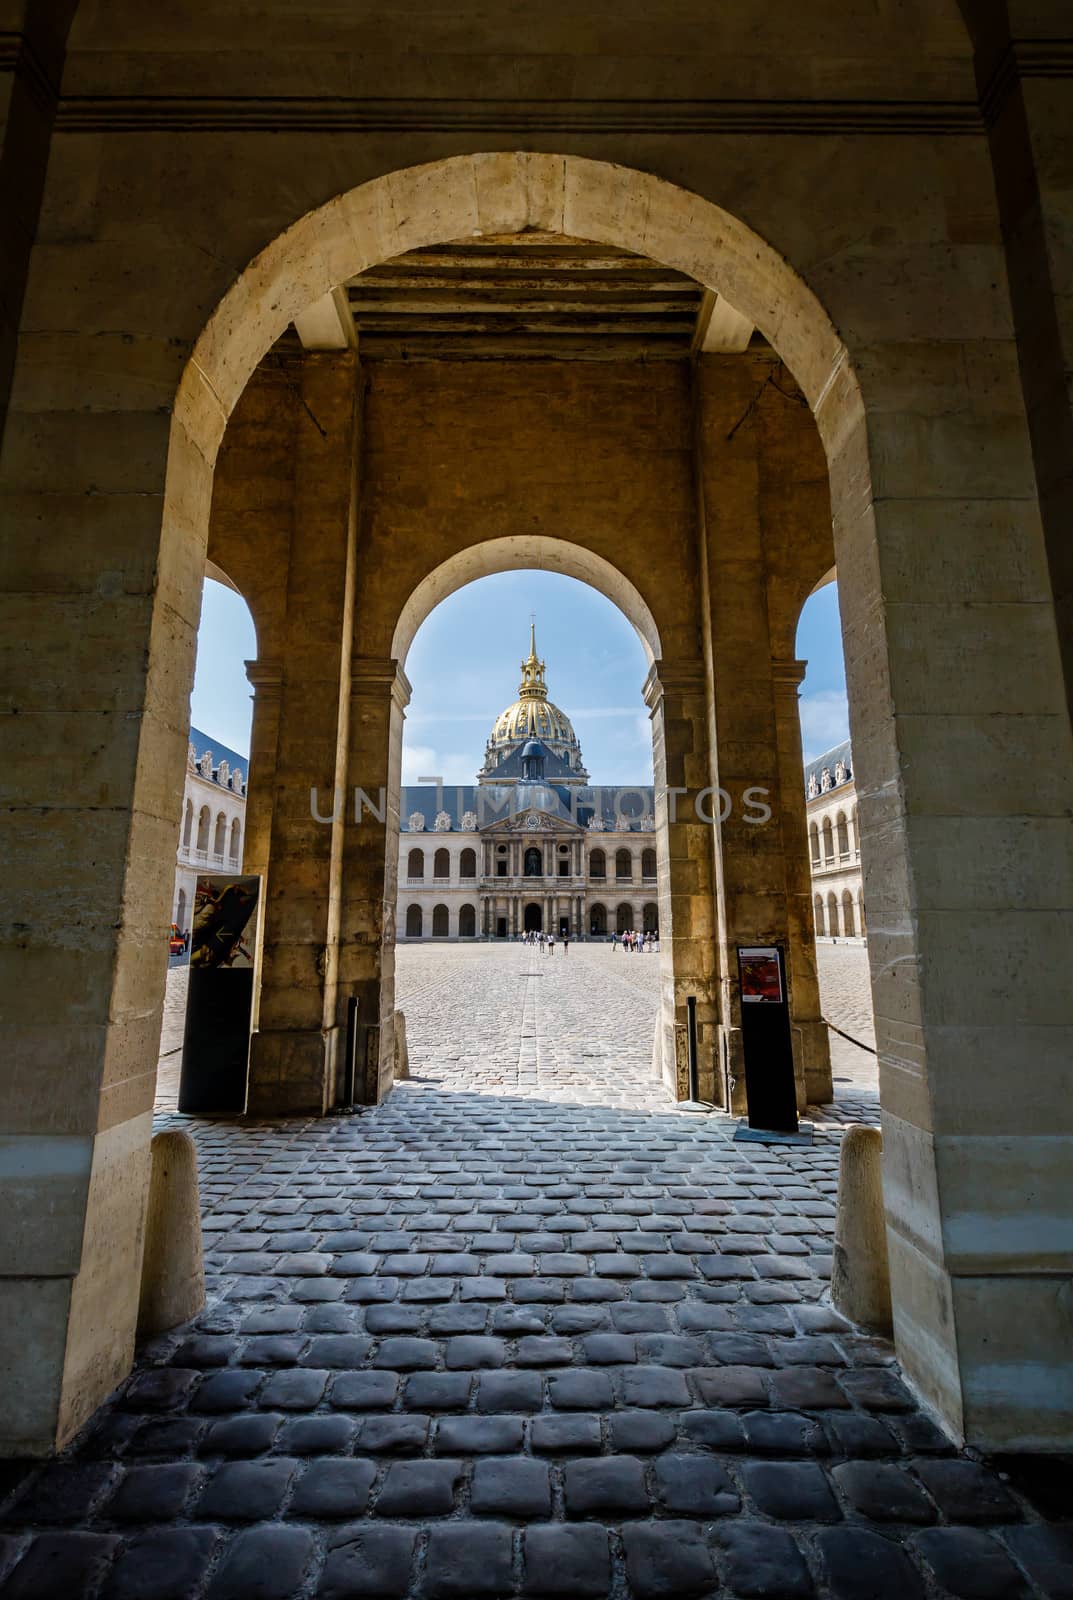 PARIS - JULY 1: Hotel des Invalides. Louis XIV initiated the project by an order dated 24 November 1670, as a home and hospital for aged and unwell soldiers in Paris, France on July 1, 2013